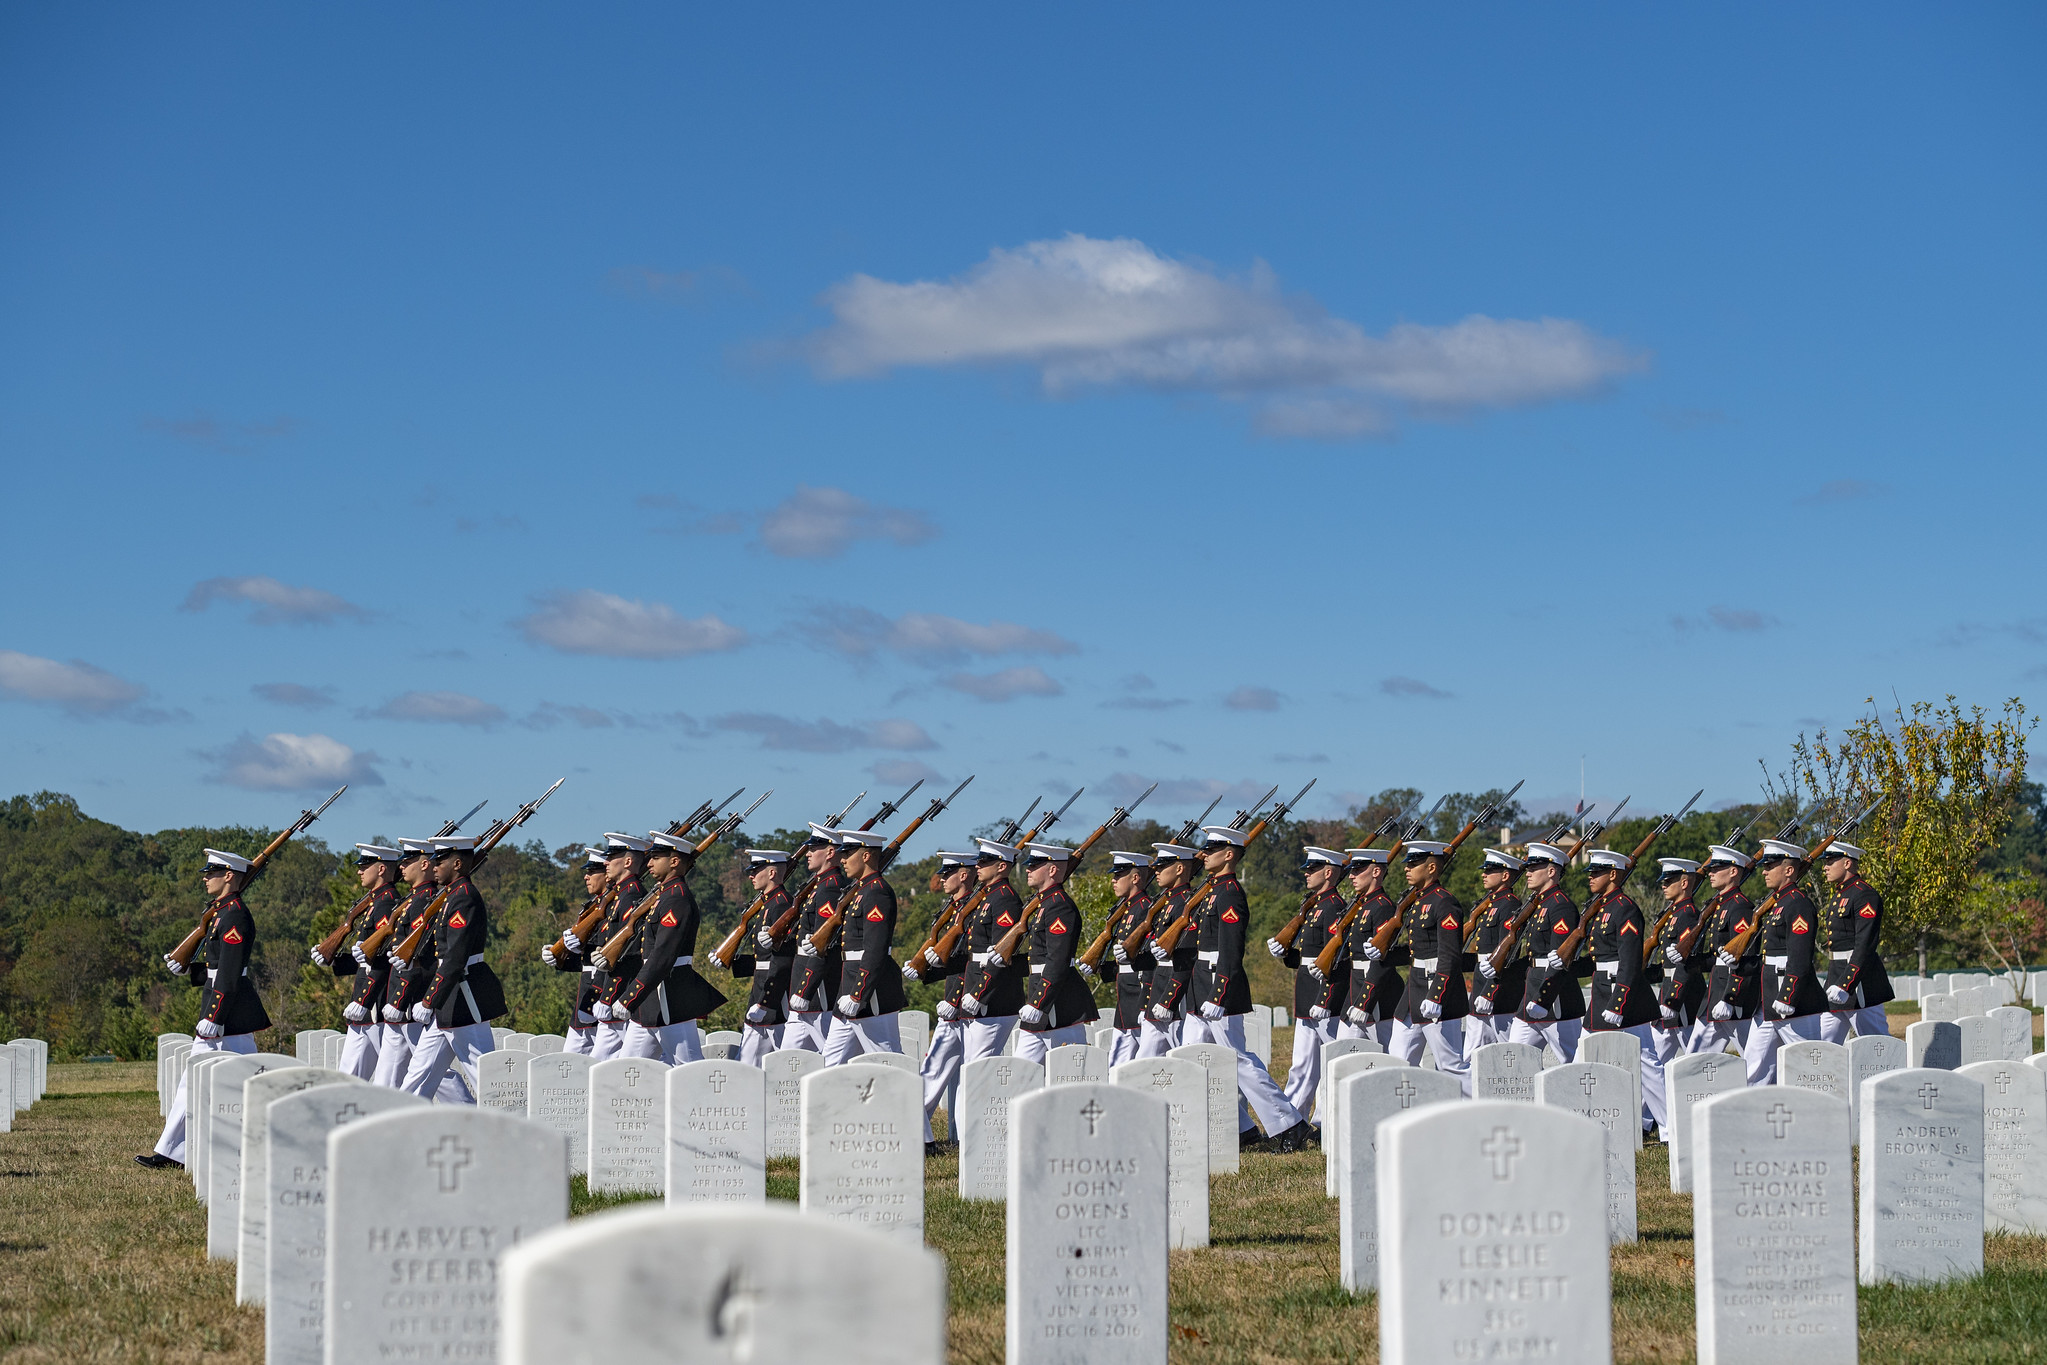 Uniformed Marines march at a military funeral, among gravesites at Arlington National Cemetery